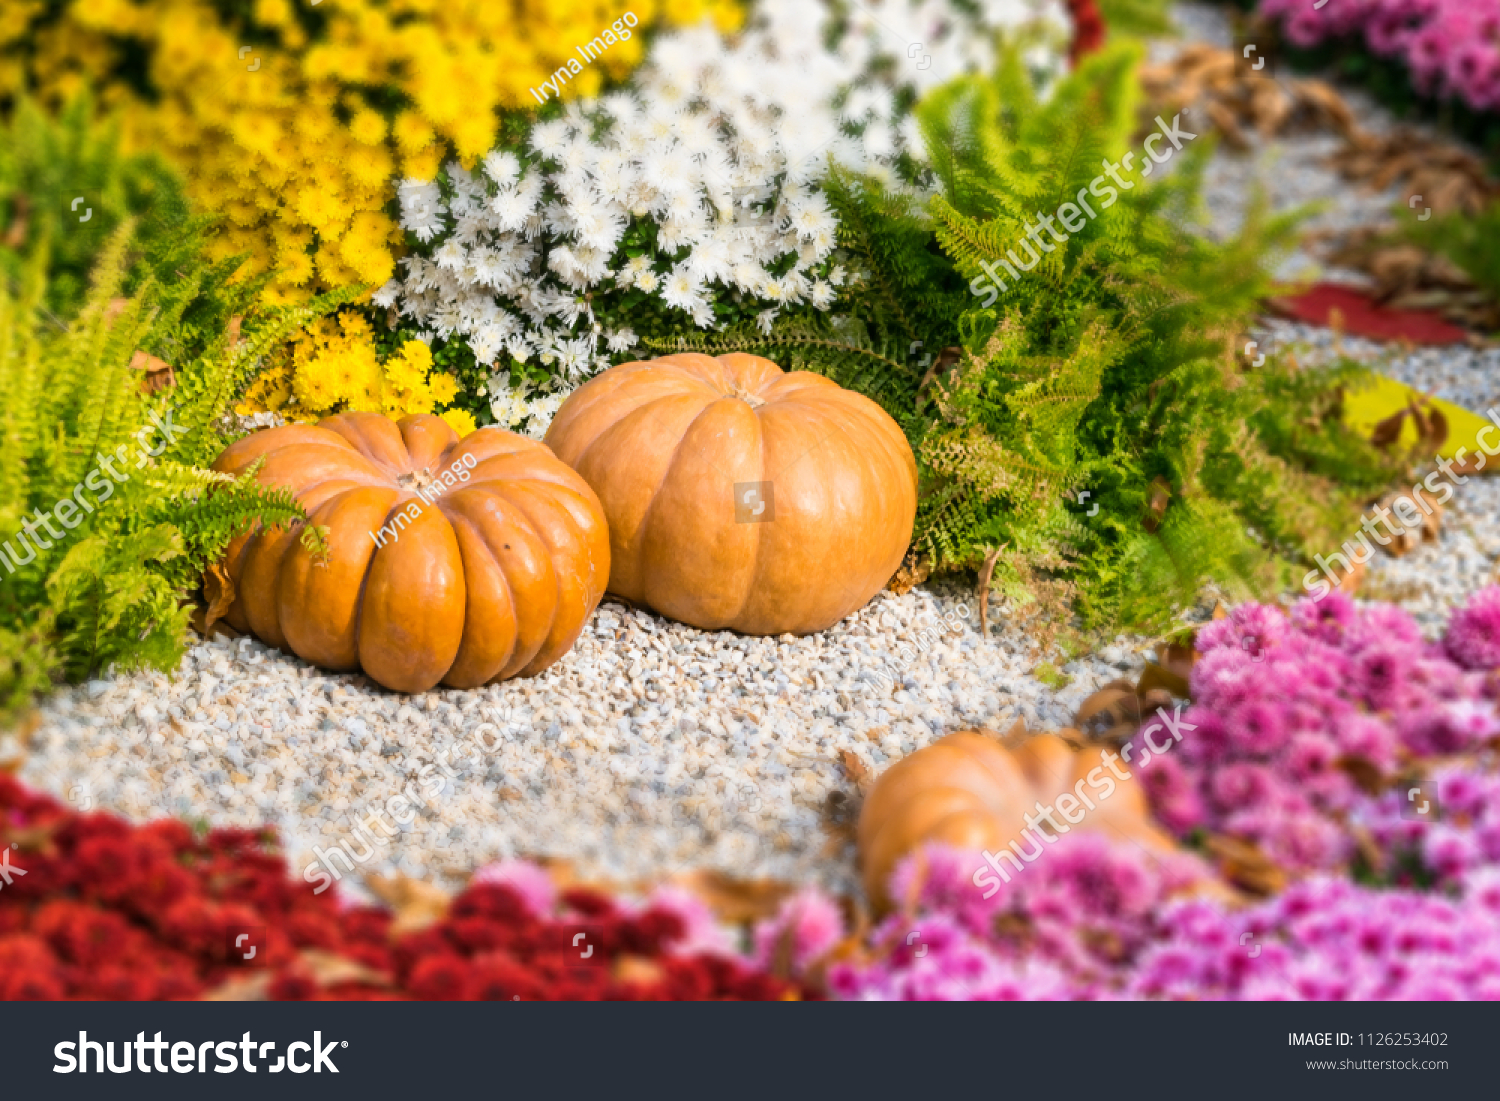 Fresh orange pumpkins and chrysanthemums in autumn garden. Fall garden, park with decorative pumpkin, plants, flowers and stones. Halloween, Thanksgiving, decoration for the holiday house and garden. #1126253402